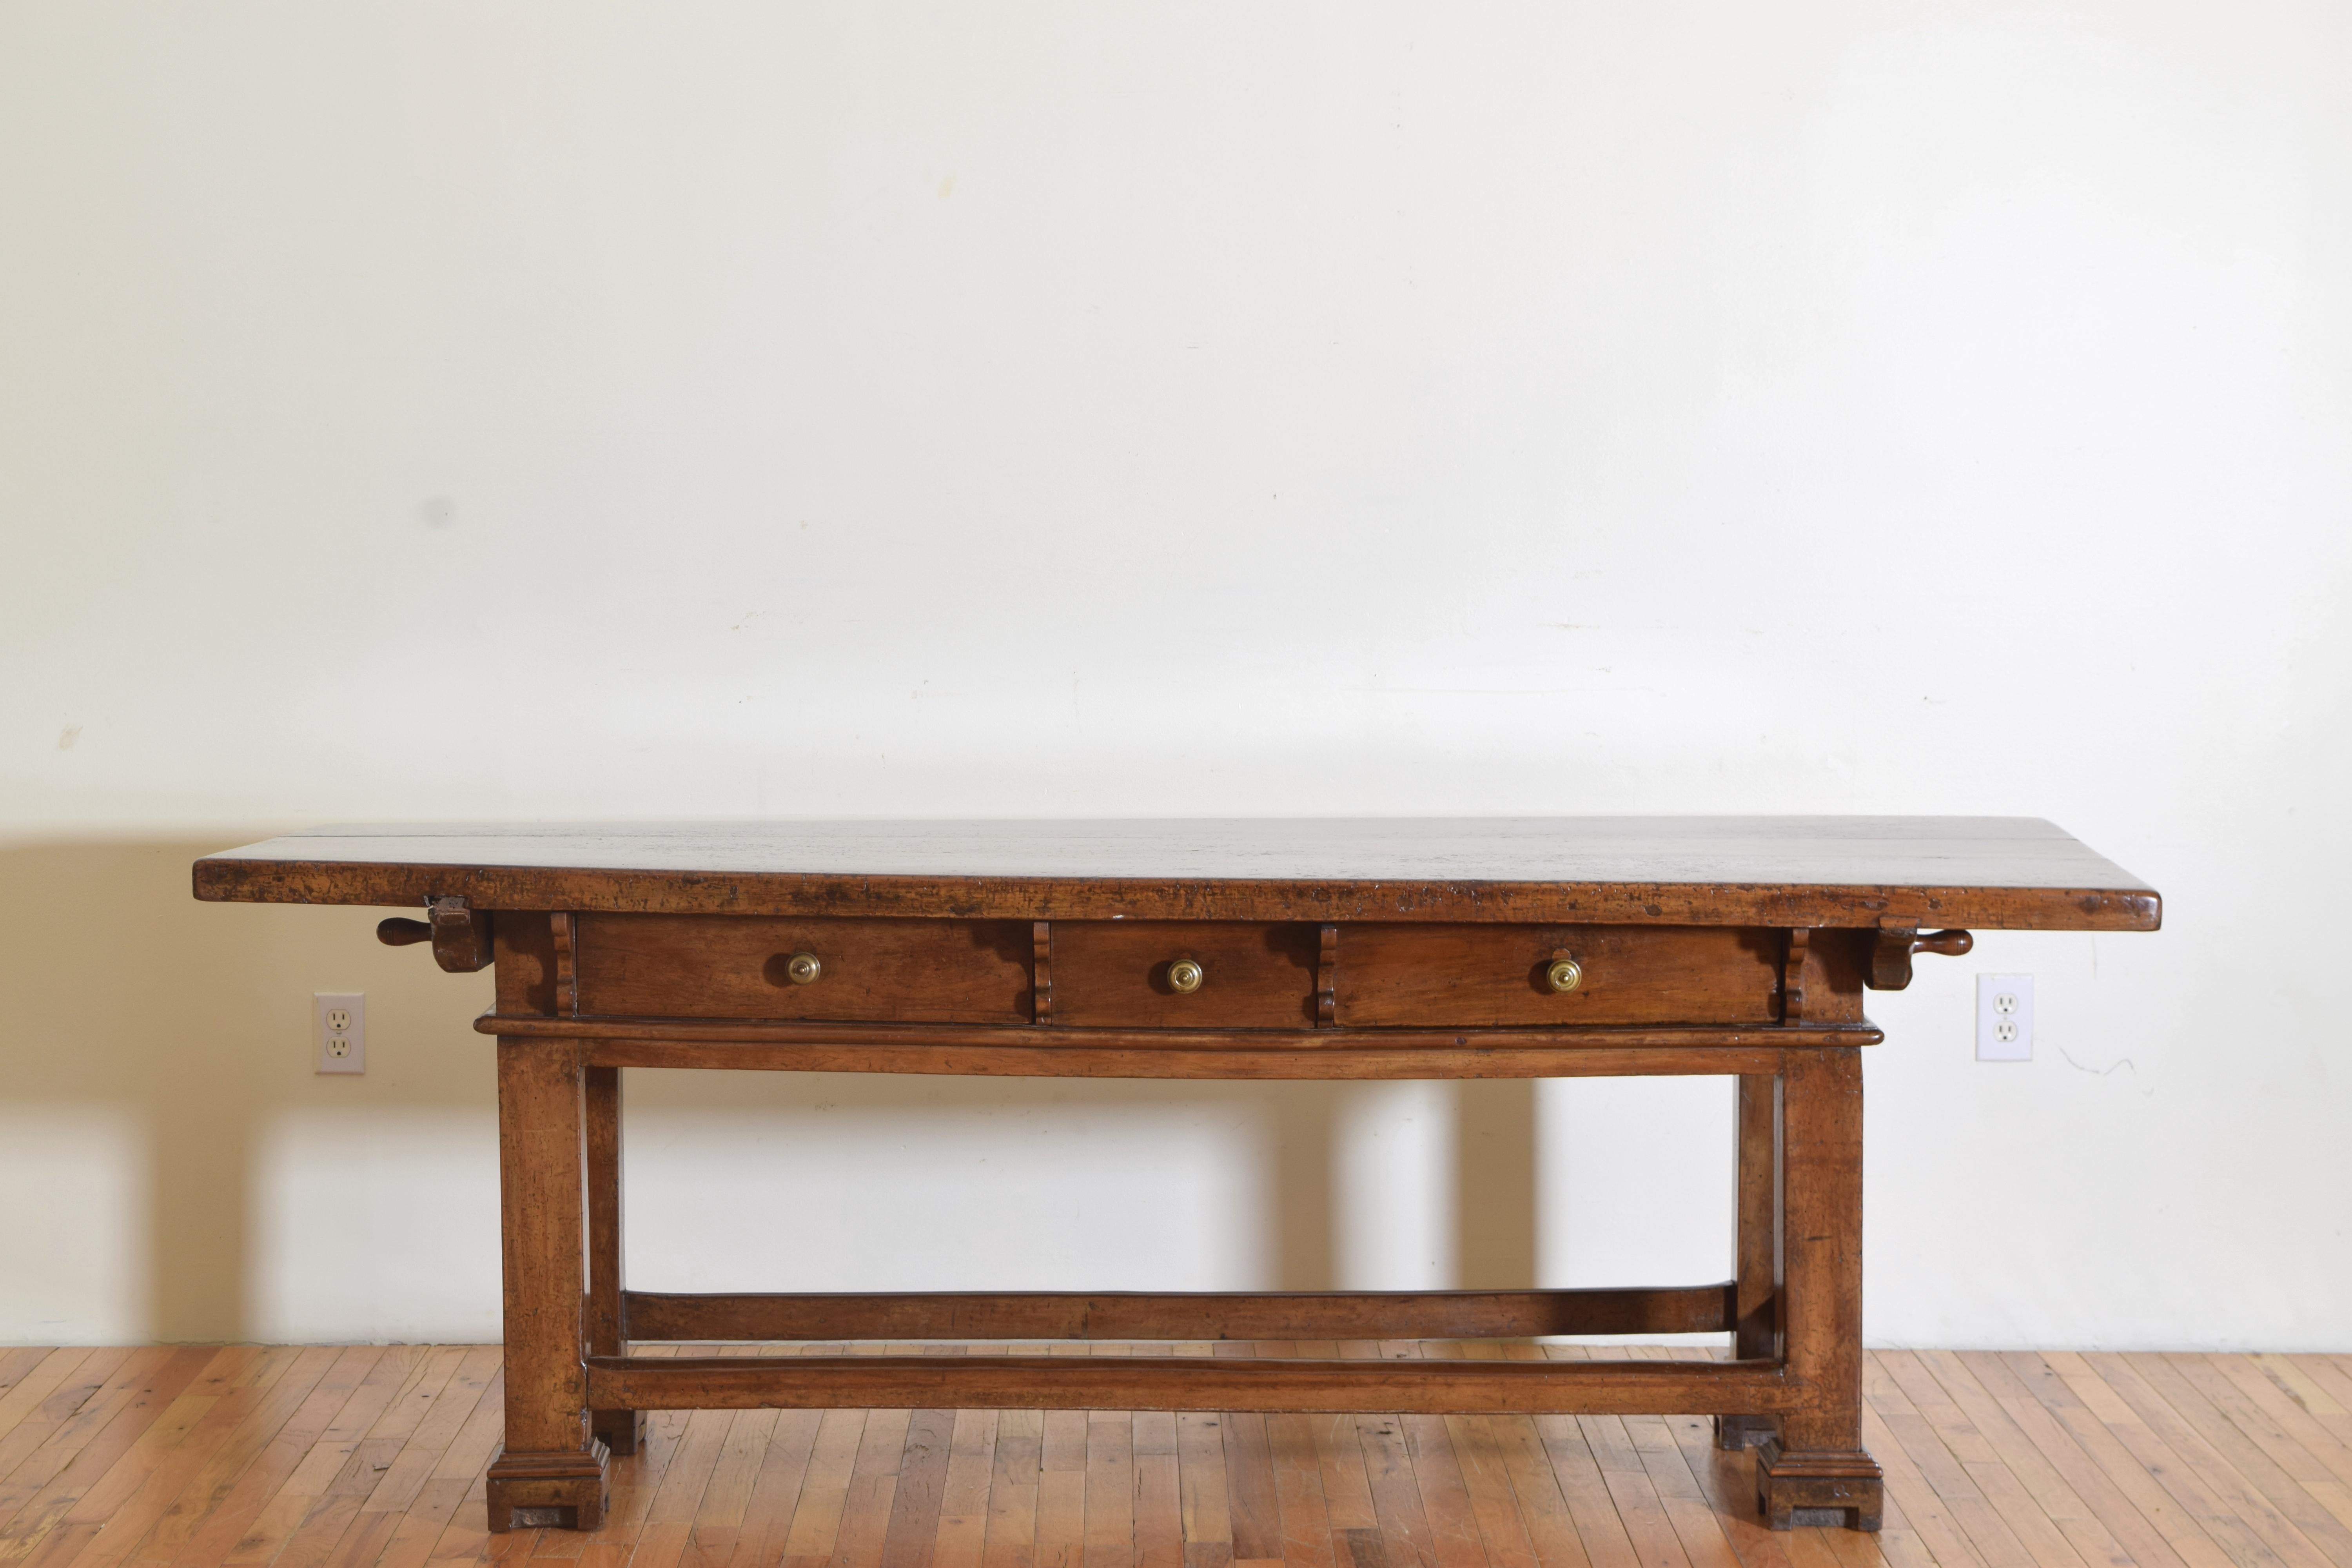 Having a thick walnut top resting on a case housing three drawers, the top and case connected by turned wooden pegs, the drawers separated by decorative pearwood buttresses and retaining antique bronzes, with a thick decorative molding at the bottom